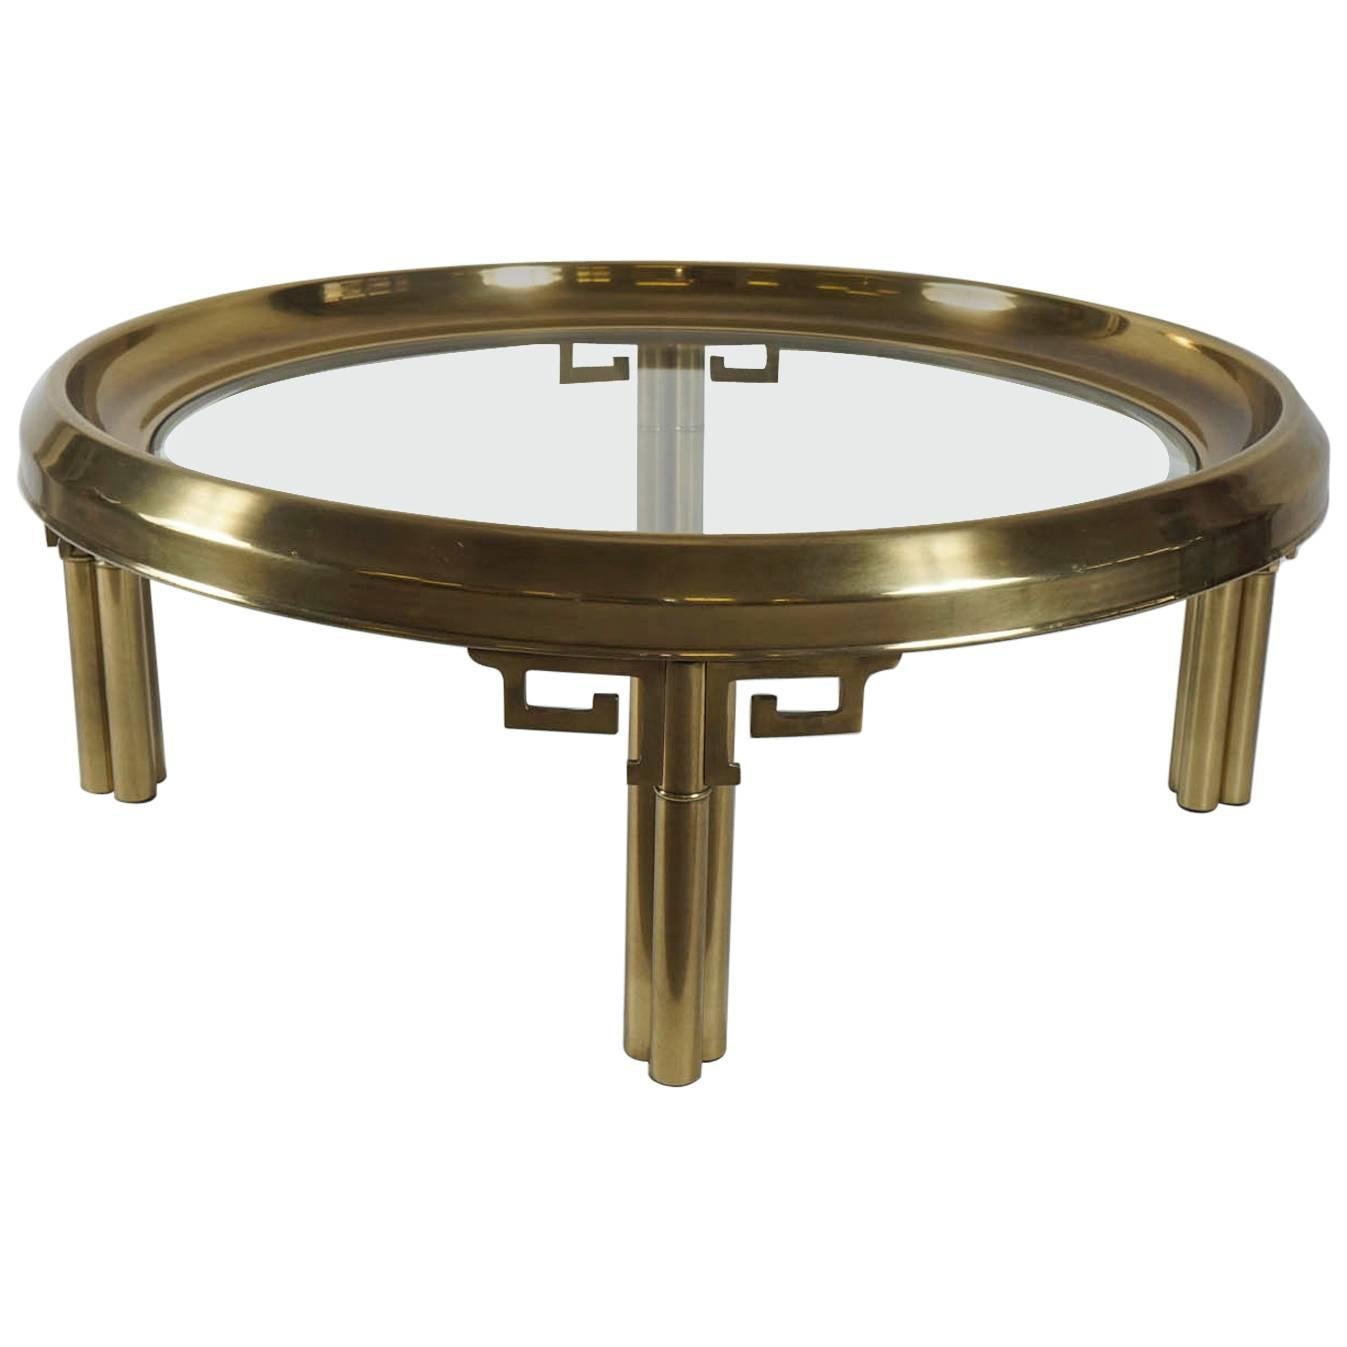 1970's mastercraft round brass coffee table with greek key detail For Sale